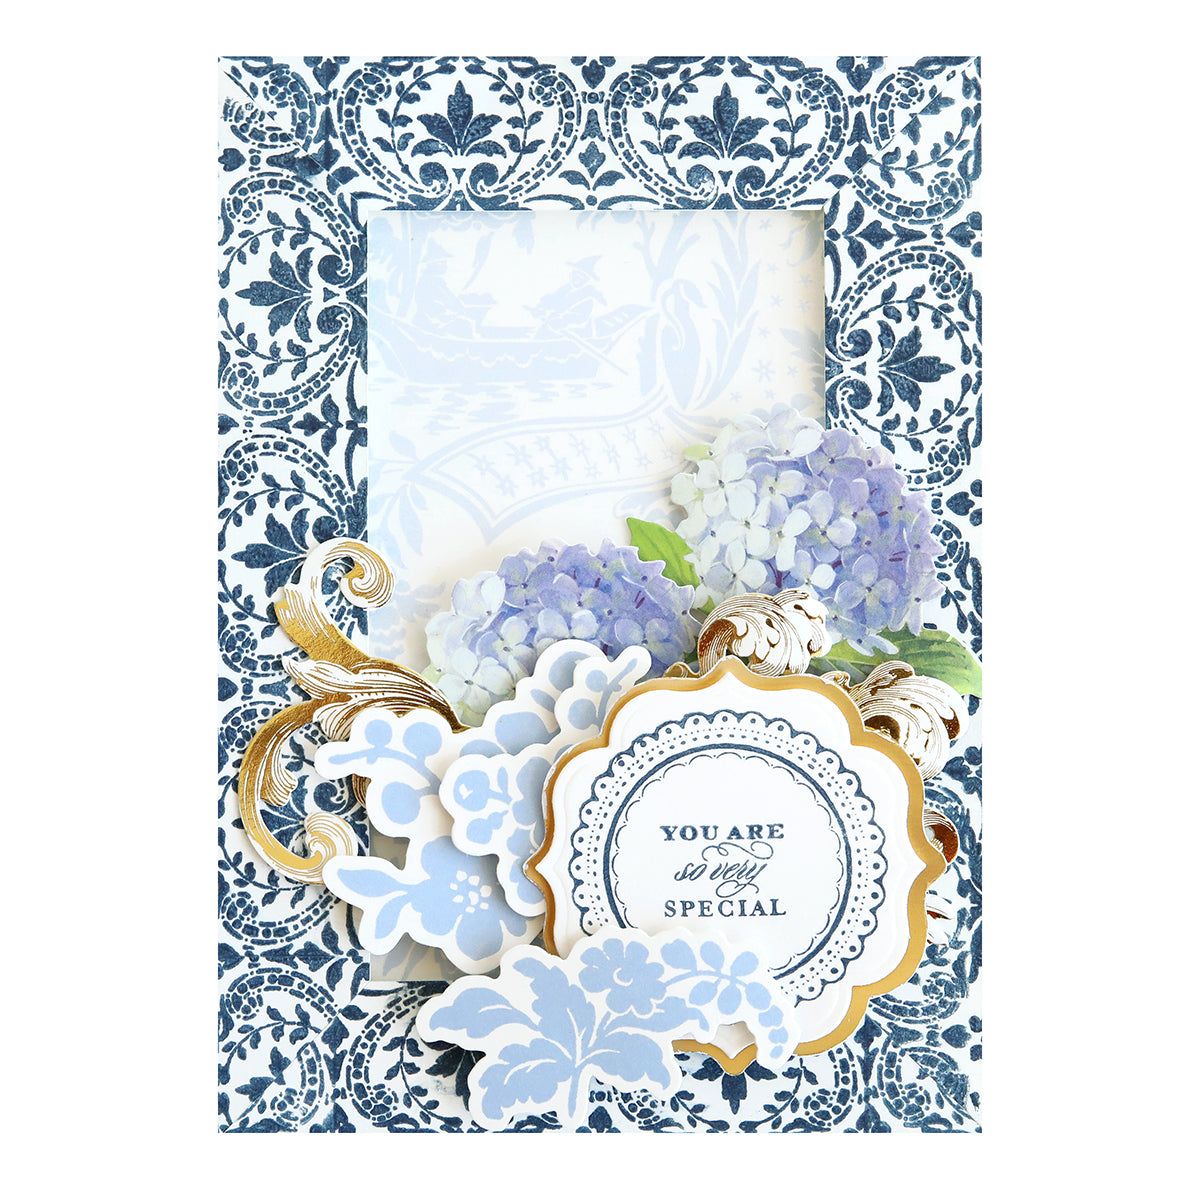 An Anniversary Stamp Set frame with flowers on it, perfect for borders and backgrounds.